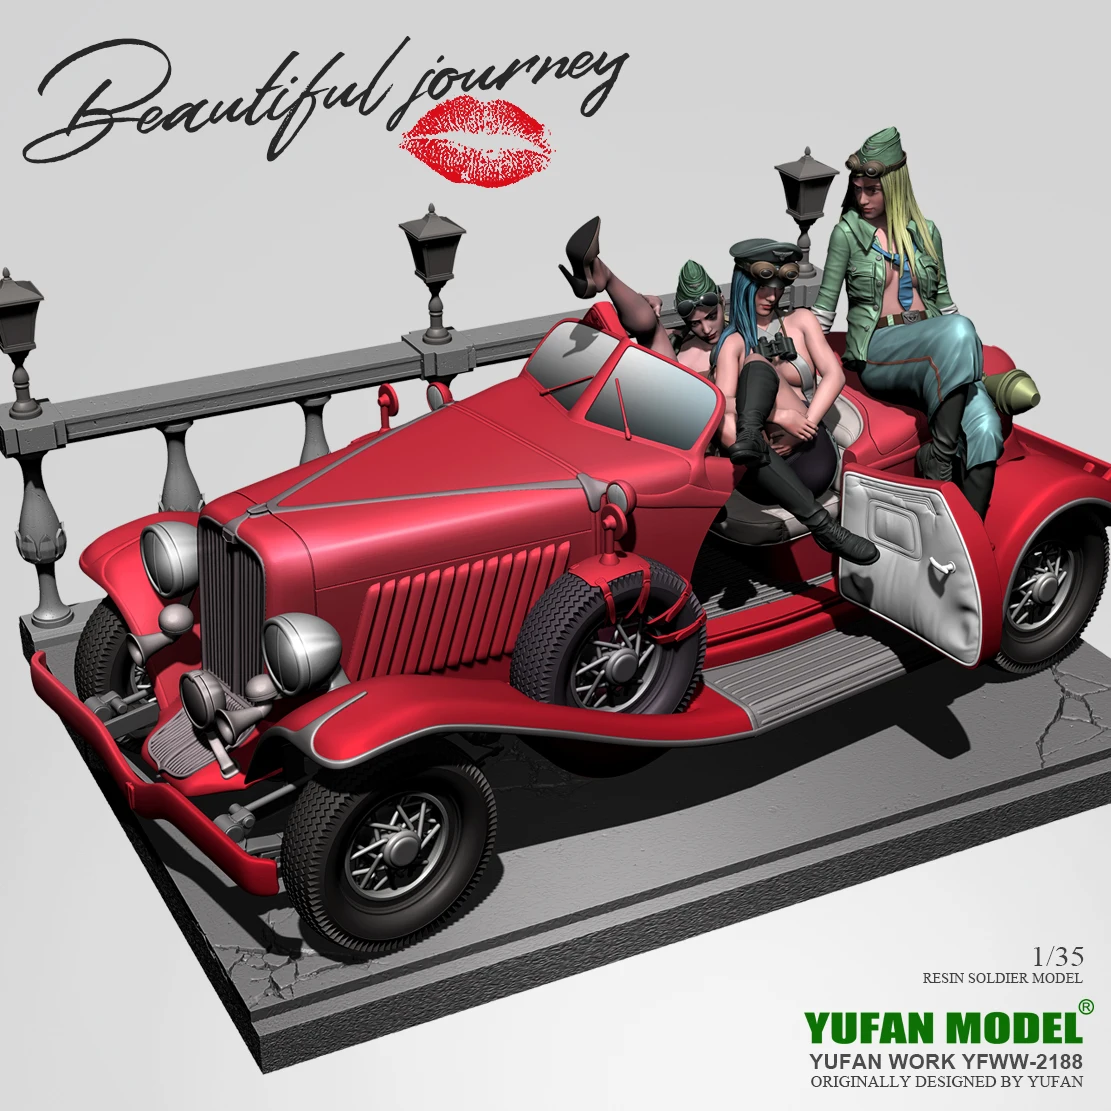 

YUFAN MODEL 1/35 Resin beauty soldier and car model kits figure colorless and self-assembled YFWW-2188